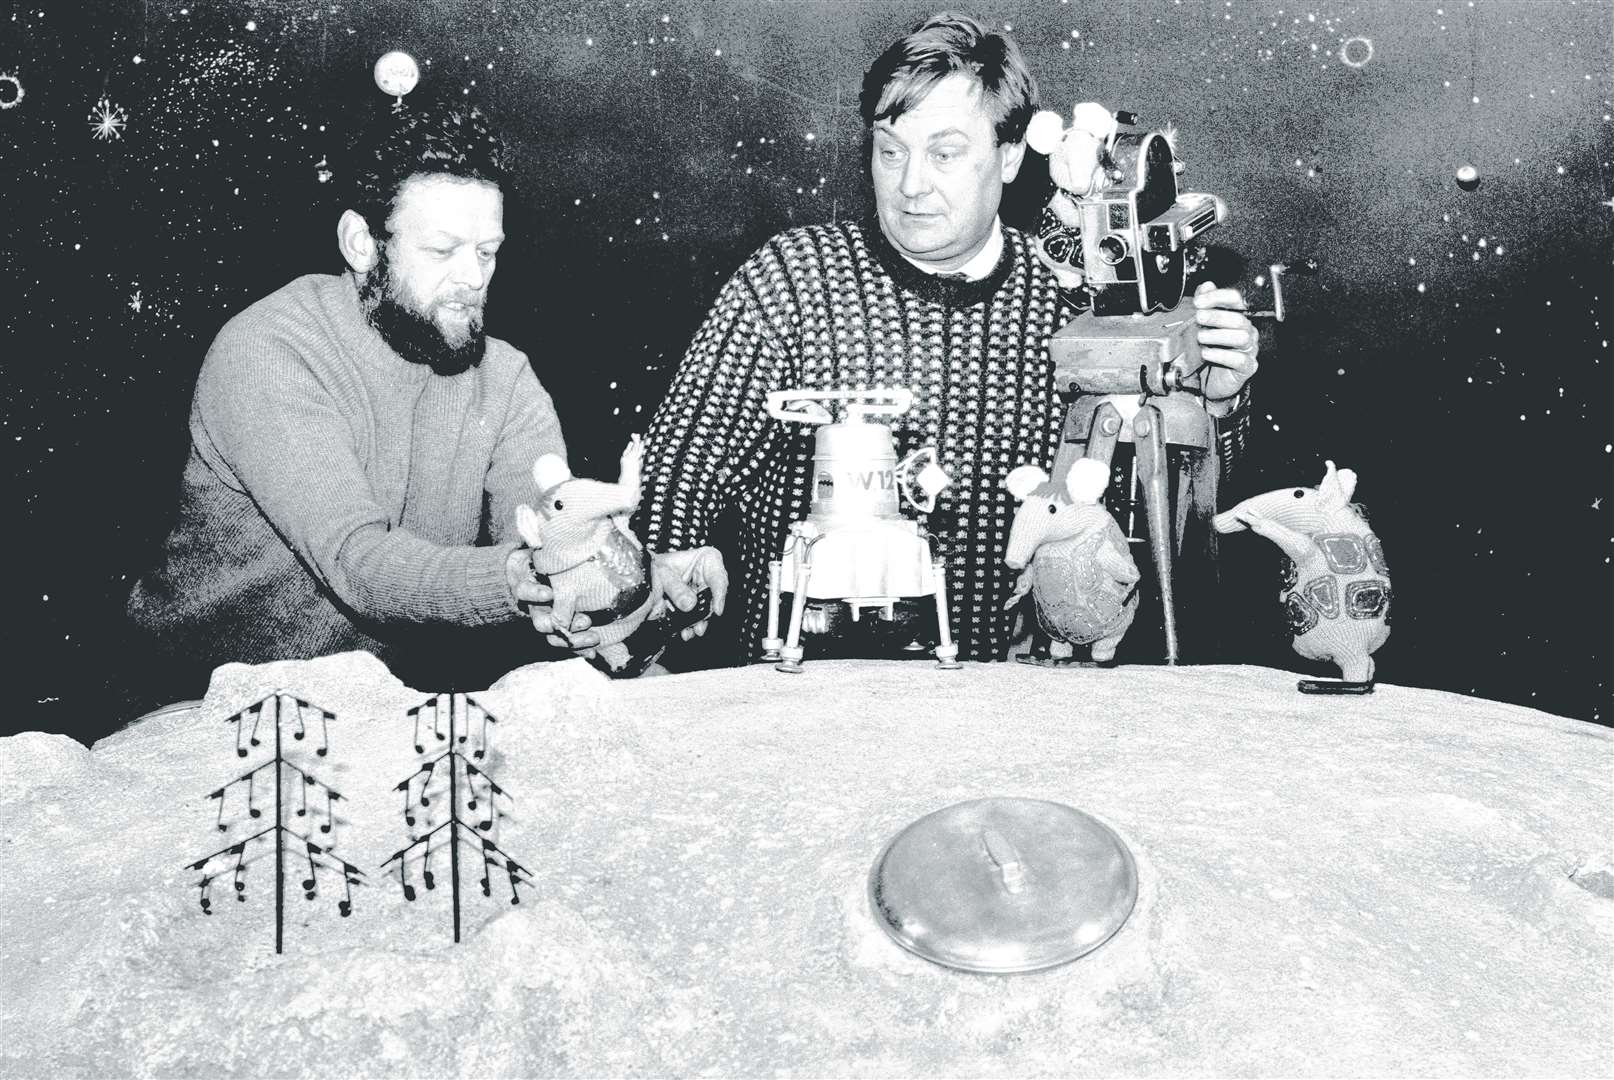 Peter Firmin and Oliver Postgate working on the Clangers in November 1969 at Firmin's Blean barn. Picture: Images of Canterbury